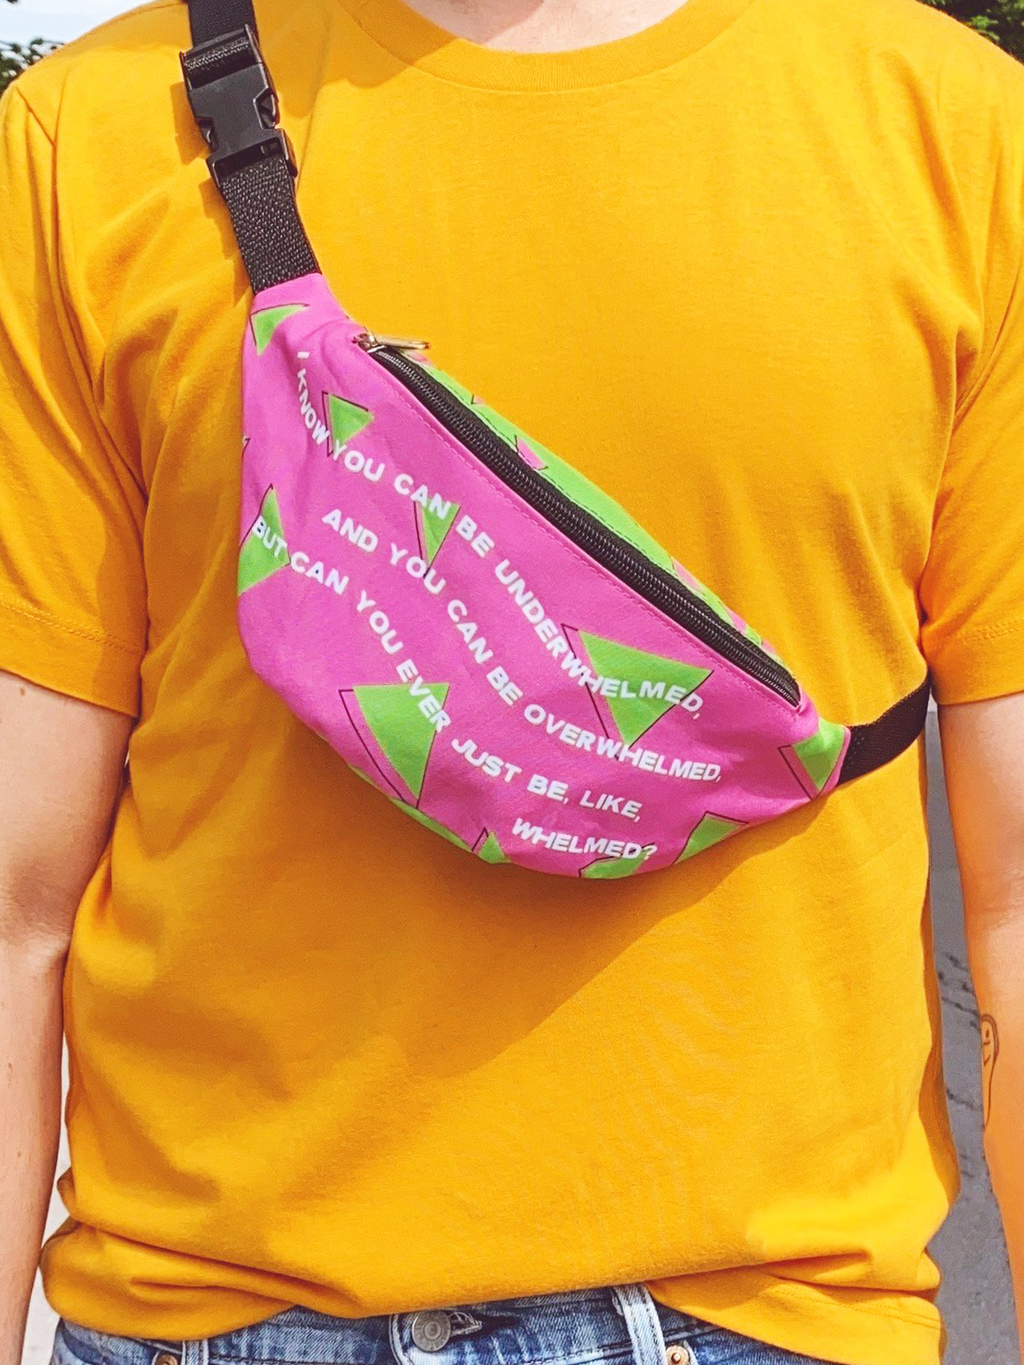 Fanny Packs Are Back, And There's Nothing You Can Do About It